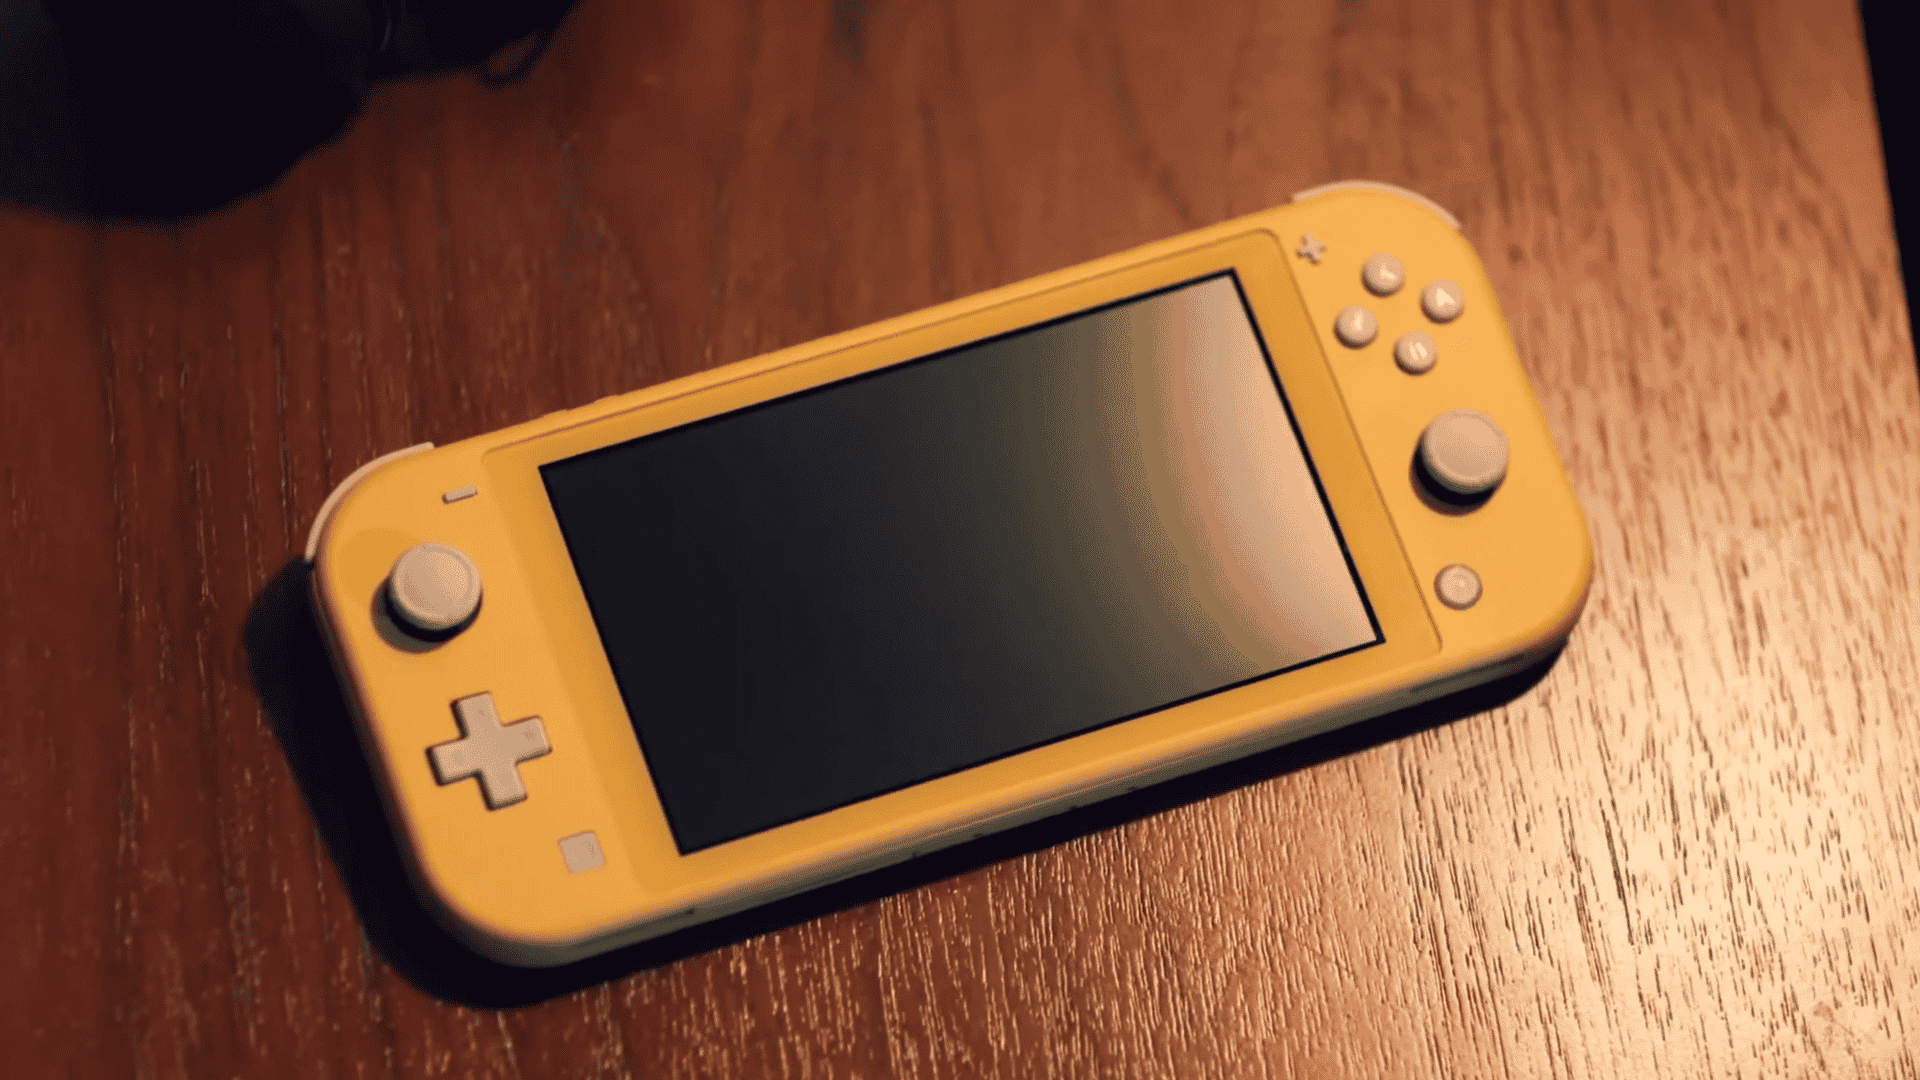 Nintendo's Switch Lite is disappointing if you already own a Switch